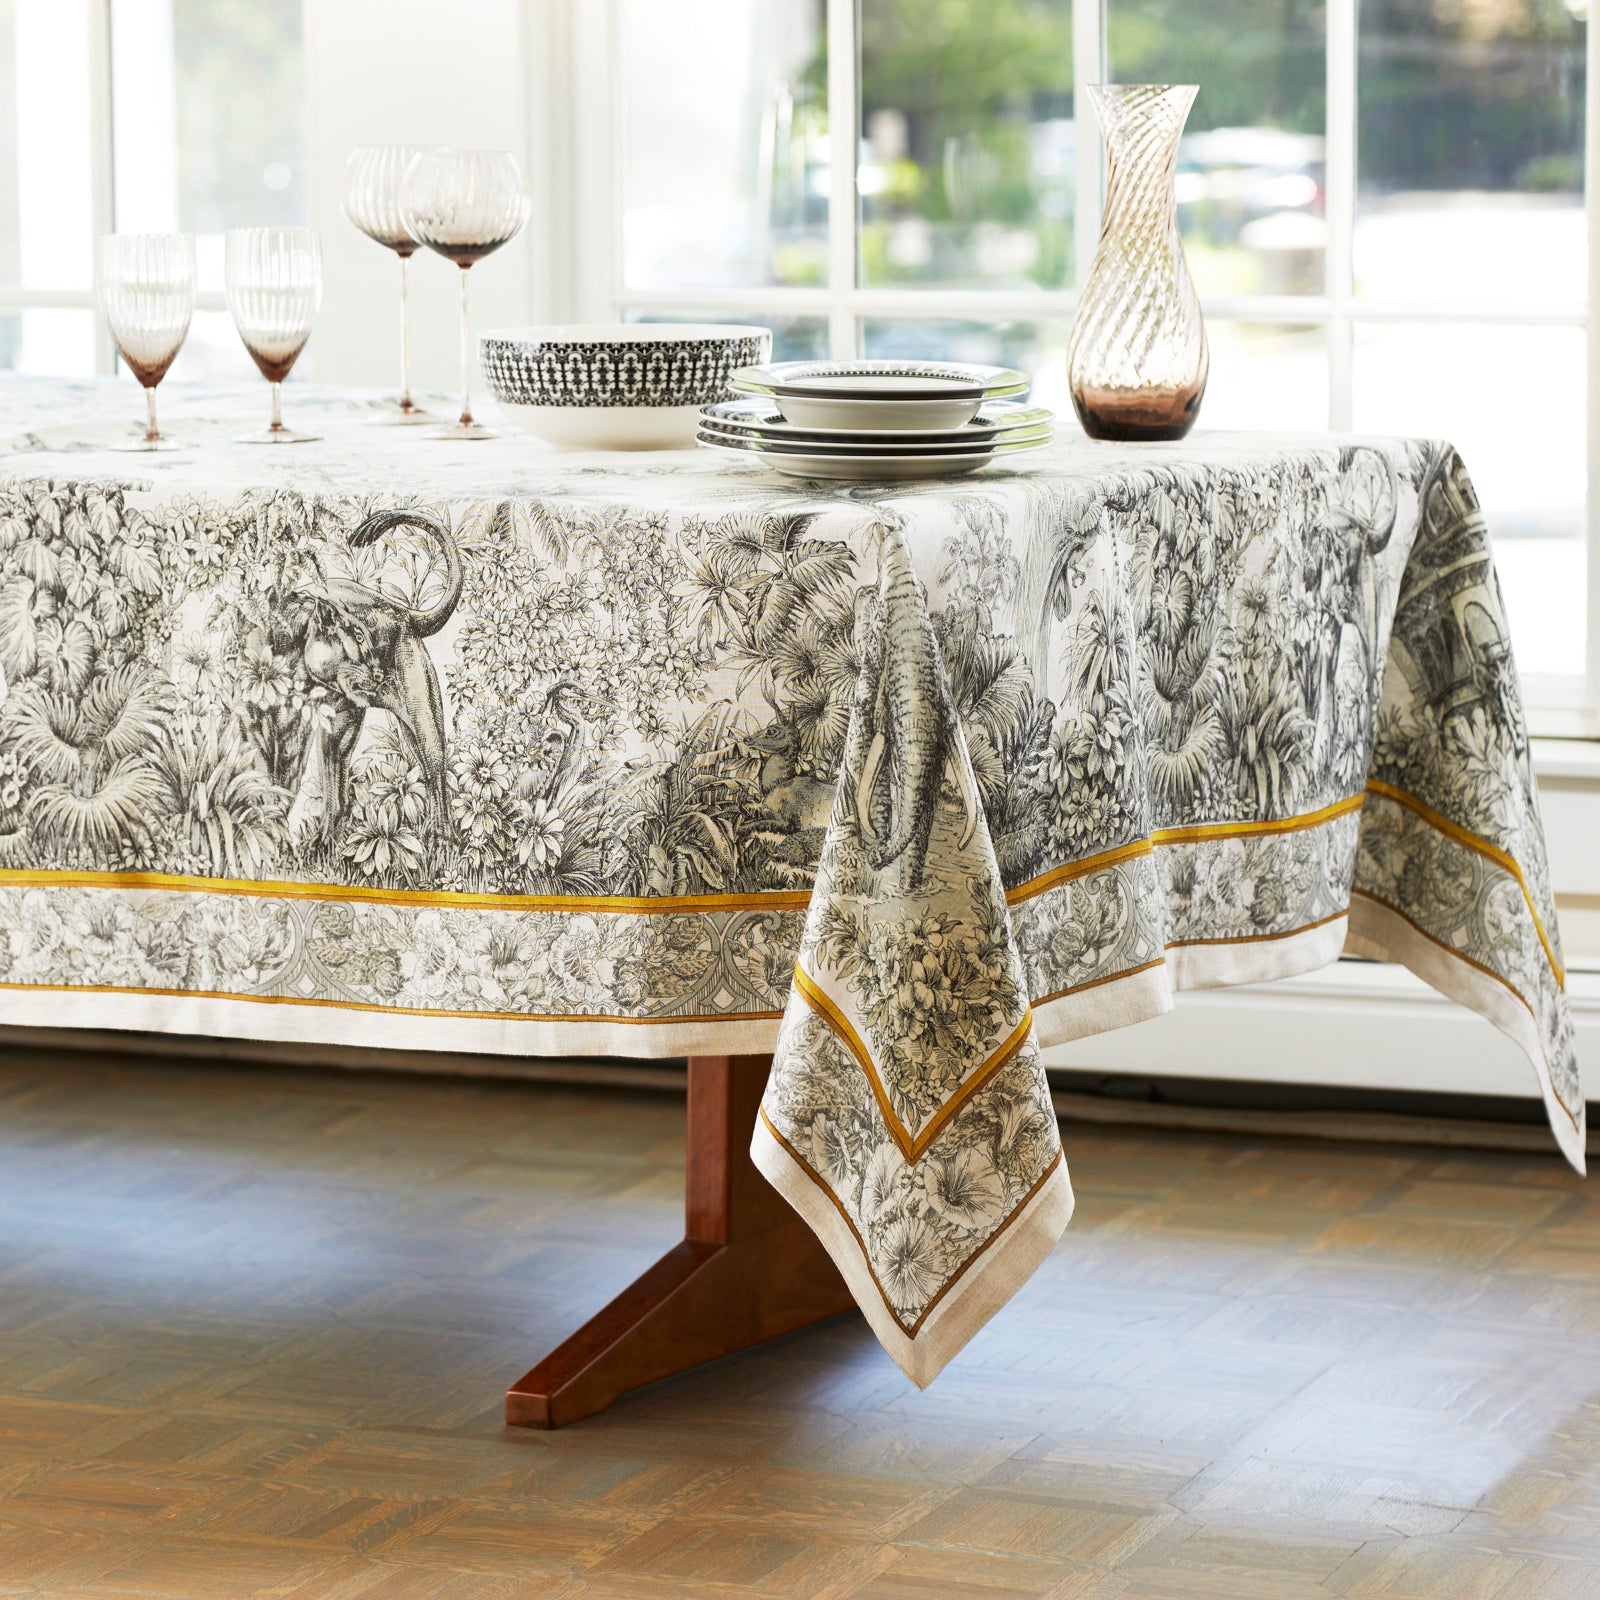 Moroccan inspired Italian Linen Tablecloth in Black, White and Gold. Part of the Tabletop Linen Collection of Tablecloths, Table Runners and Napkins from Caskata.